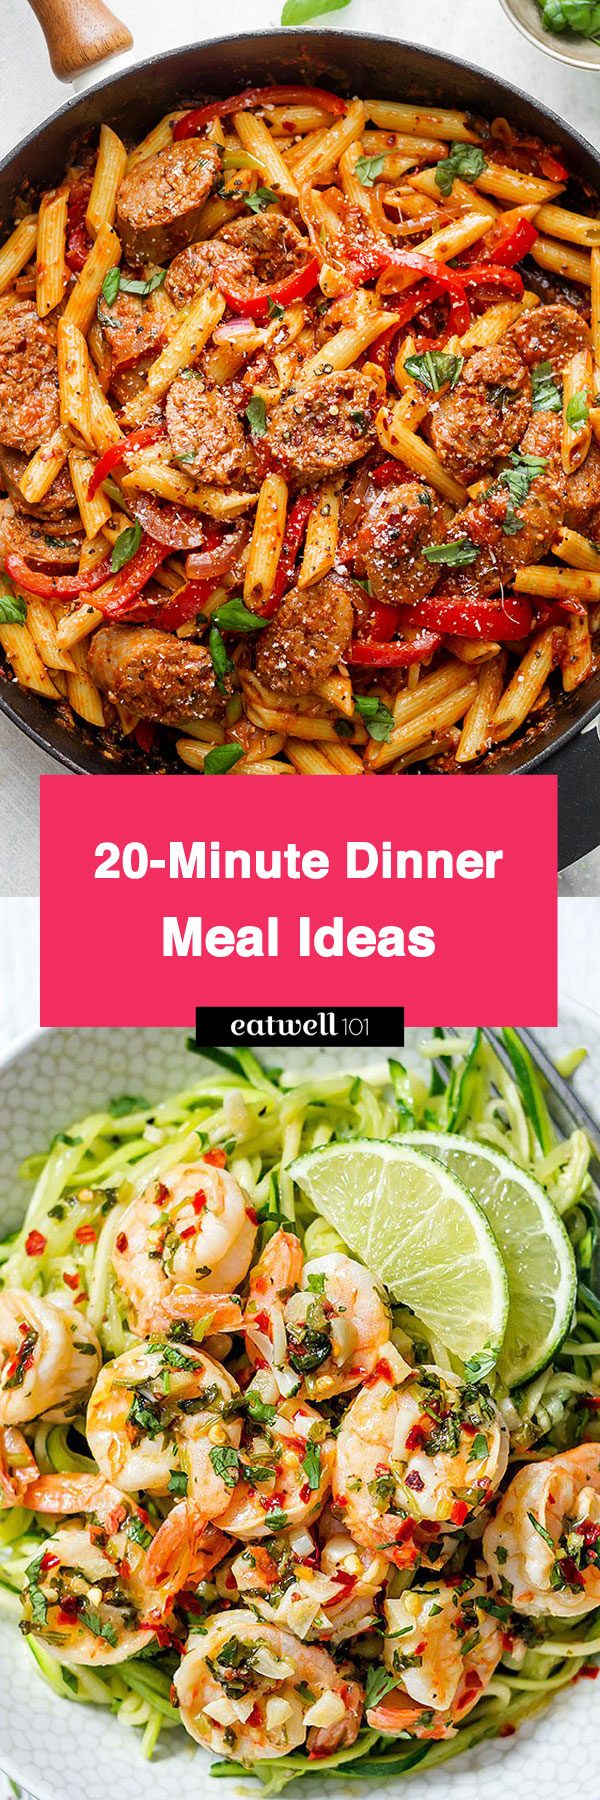 Delicious dinner meals ideas in less than 20 minutes — Make your life so much easier with super easy and tasty recipes.